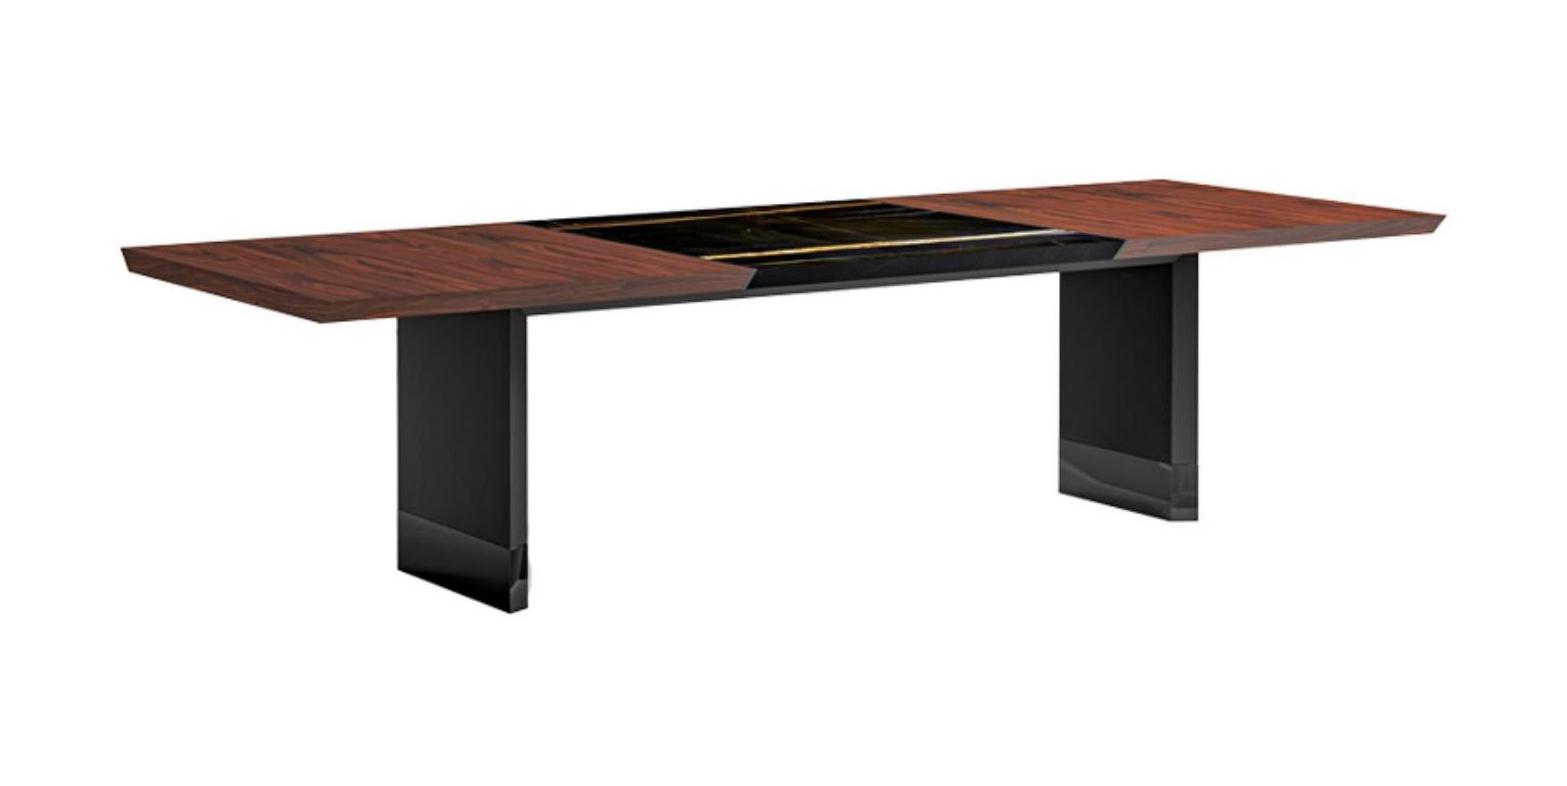 Marble Insert Table 220 with Leather-Wrapped Legs